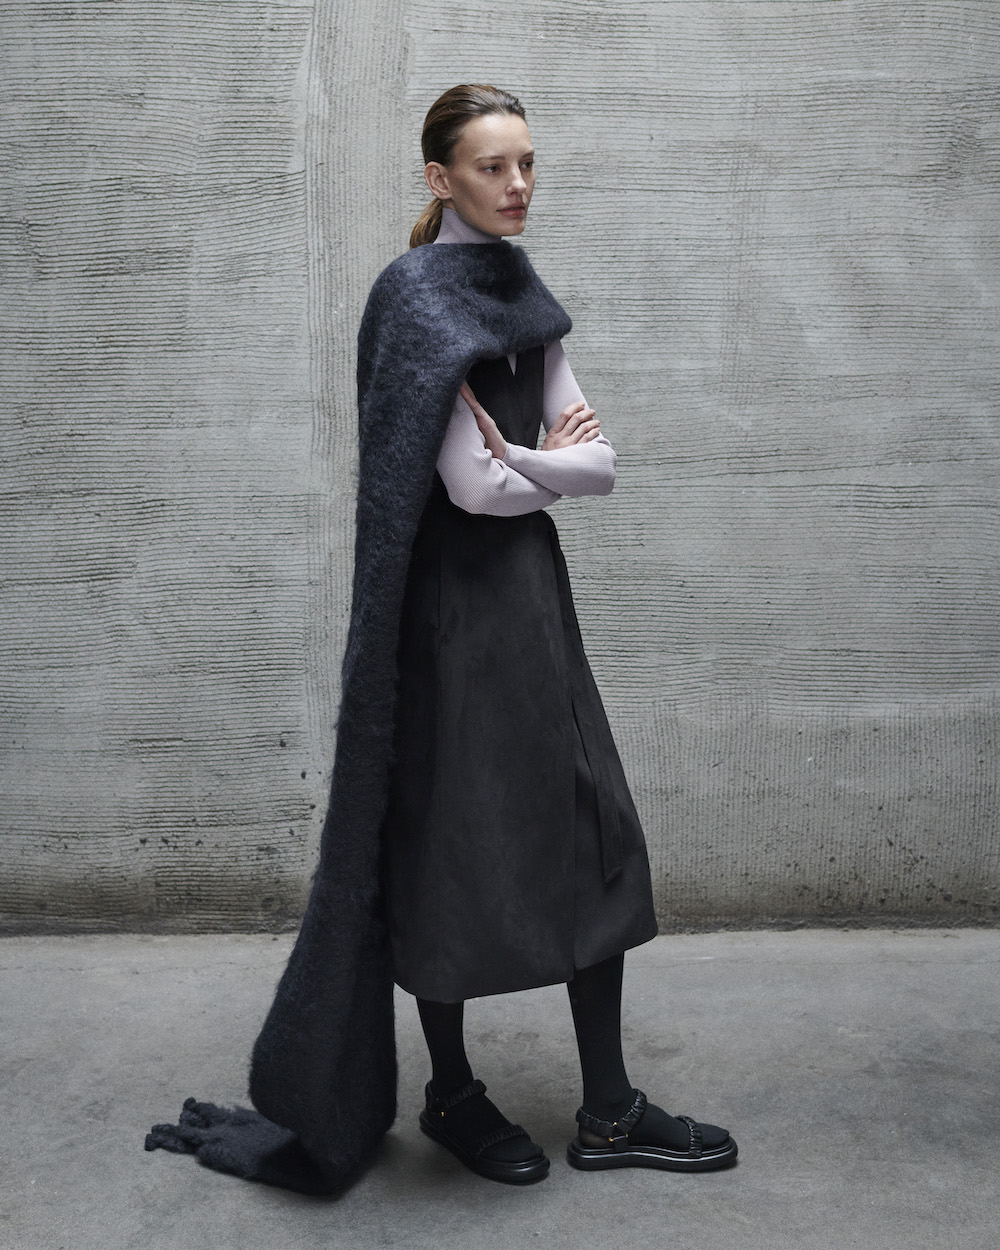 Halson presents the Fall 2022 collection photographed by Jody Rogac.